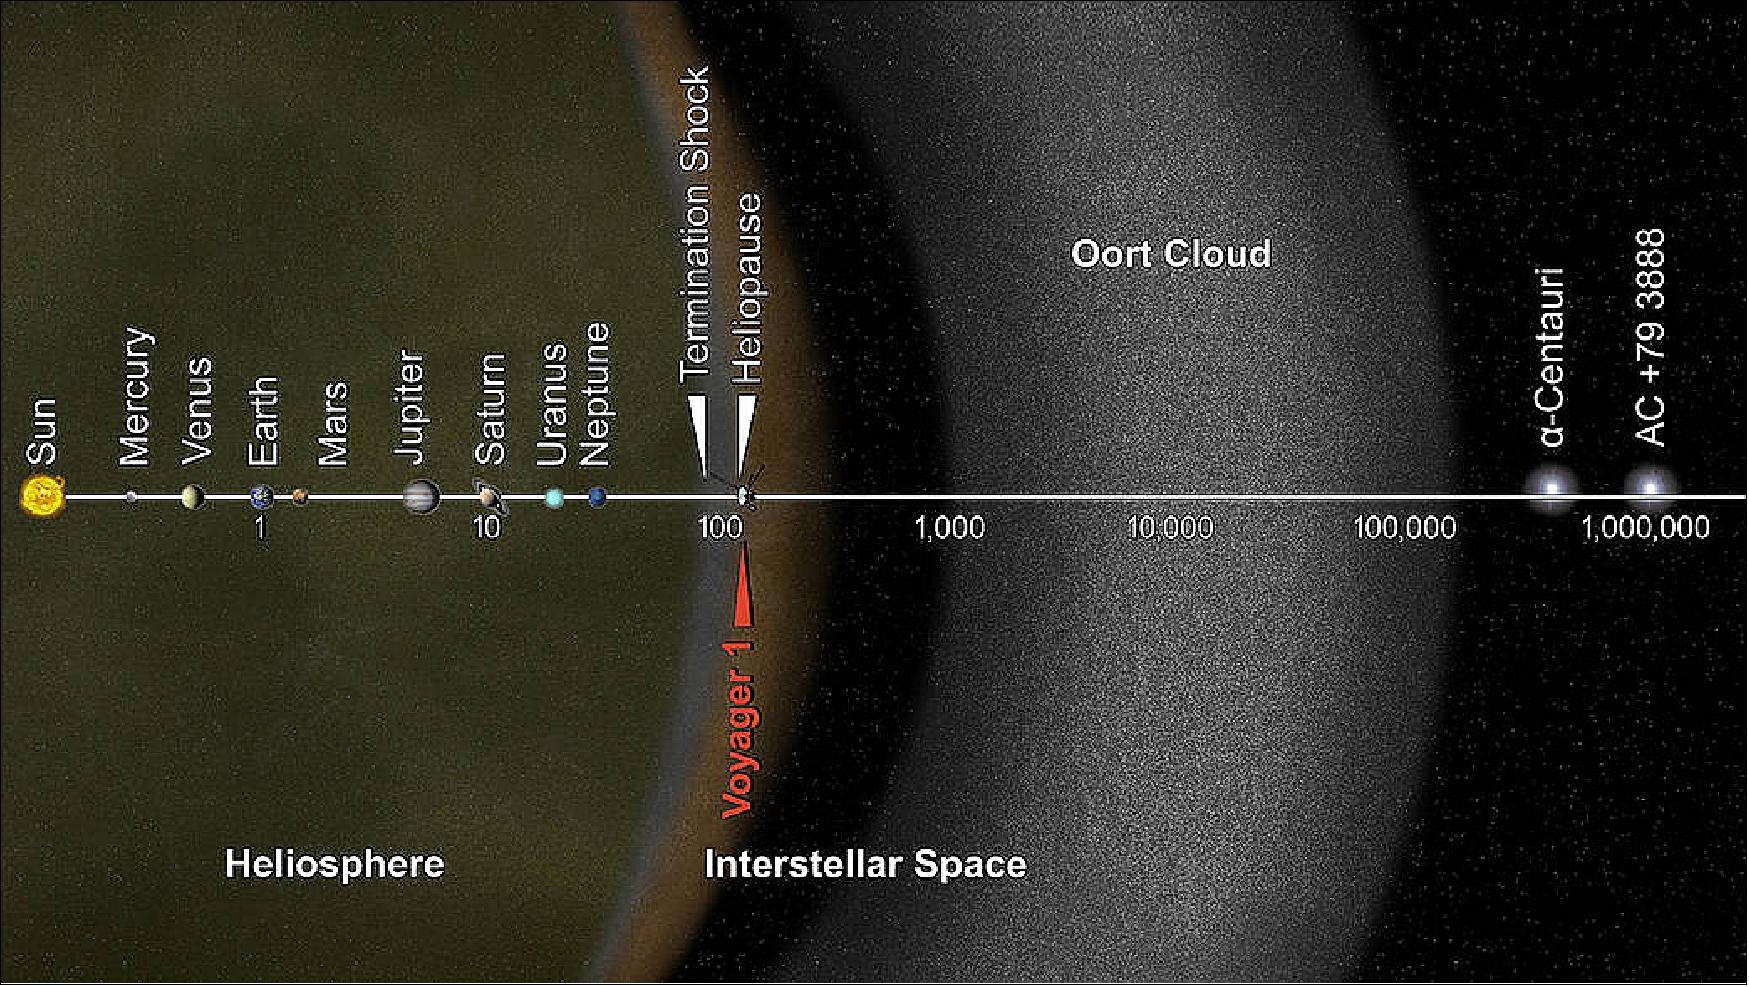 Figure 24: This artist's concept puts solar system distances in perspective. The scale bar is in astronomical units, with each set distance beyond 1 AU representing 10 times the previous distance. One AU is the distance from the Sun to the Earth, which is about 150 million kilometers. Neptune, the most distant planet from the Sun, is about 30 AU (image credit: NASA/JPL-Caltech)